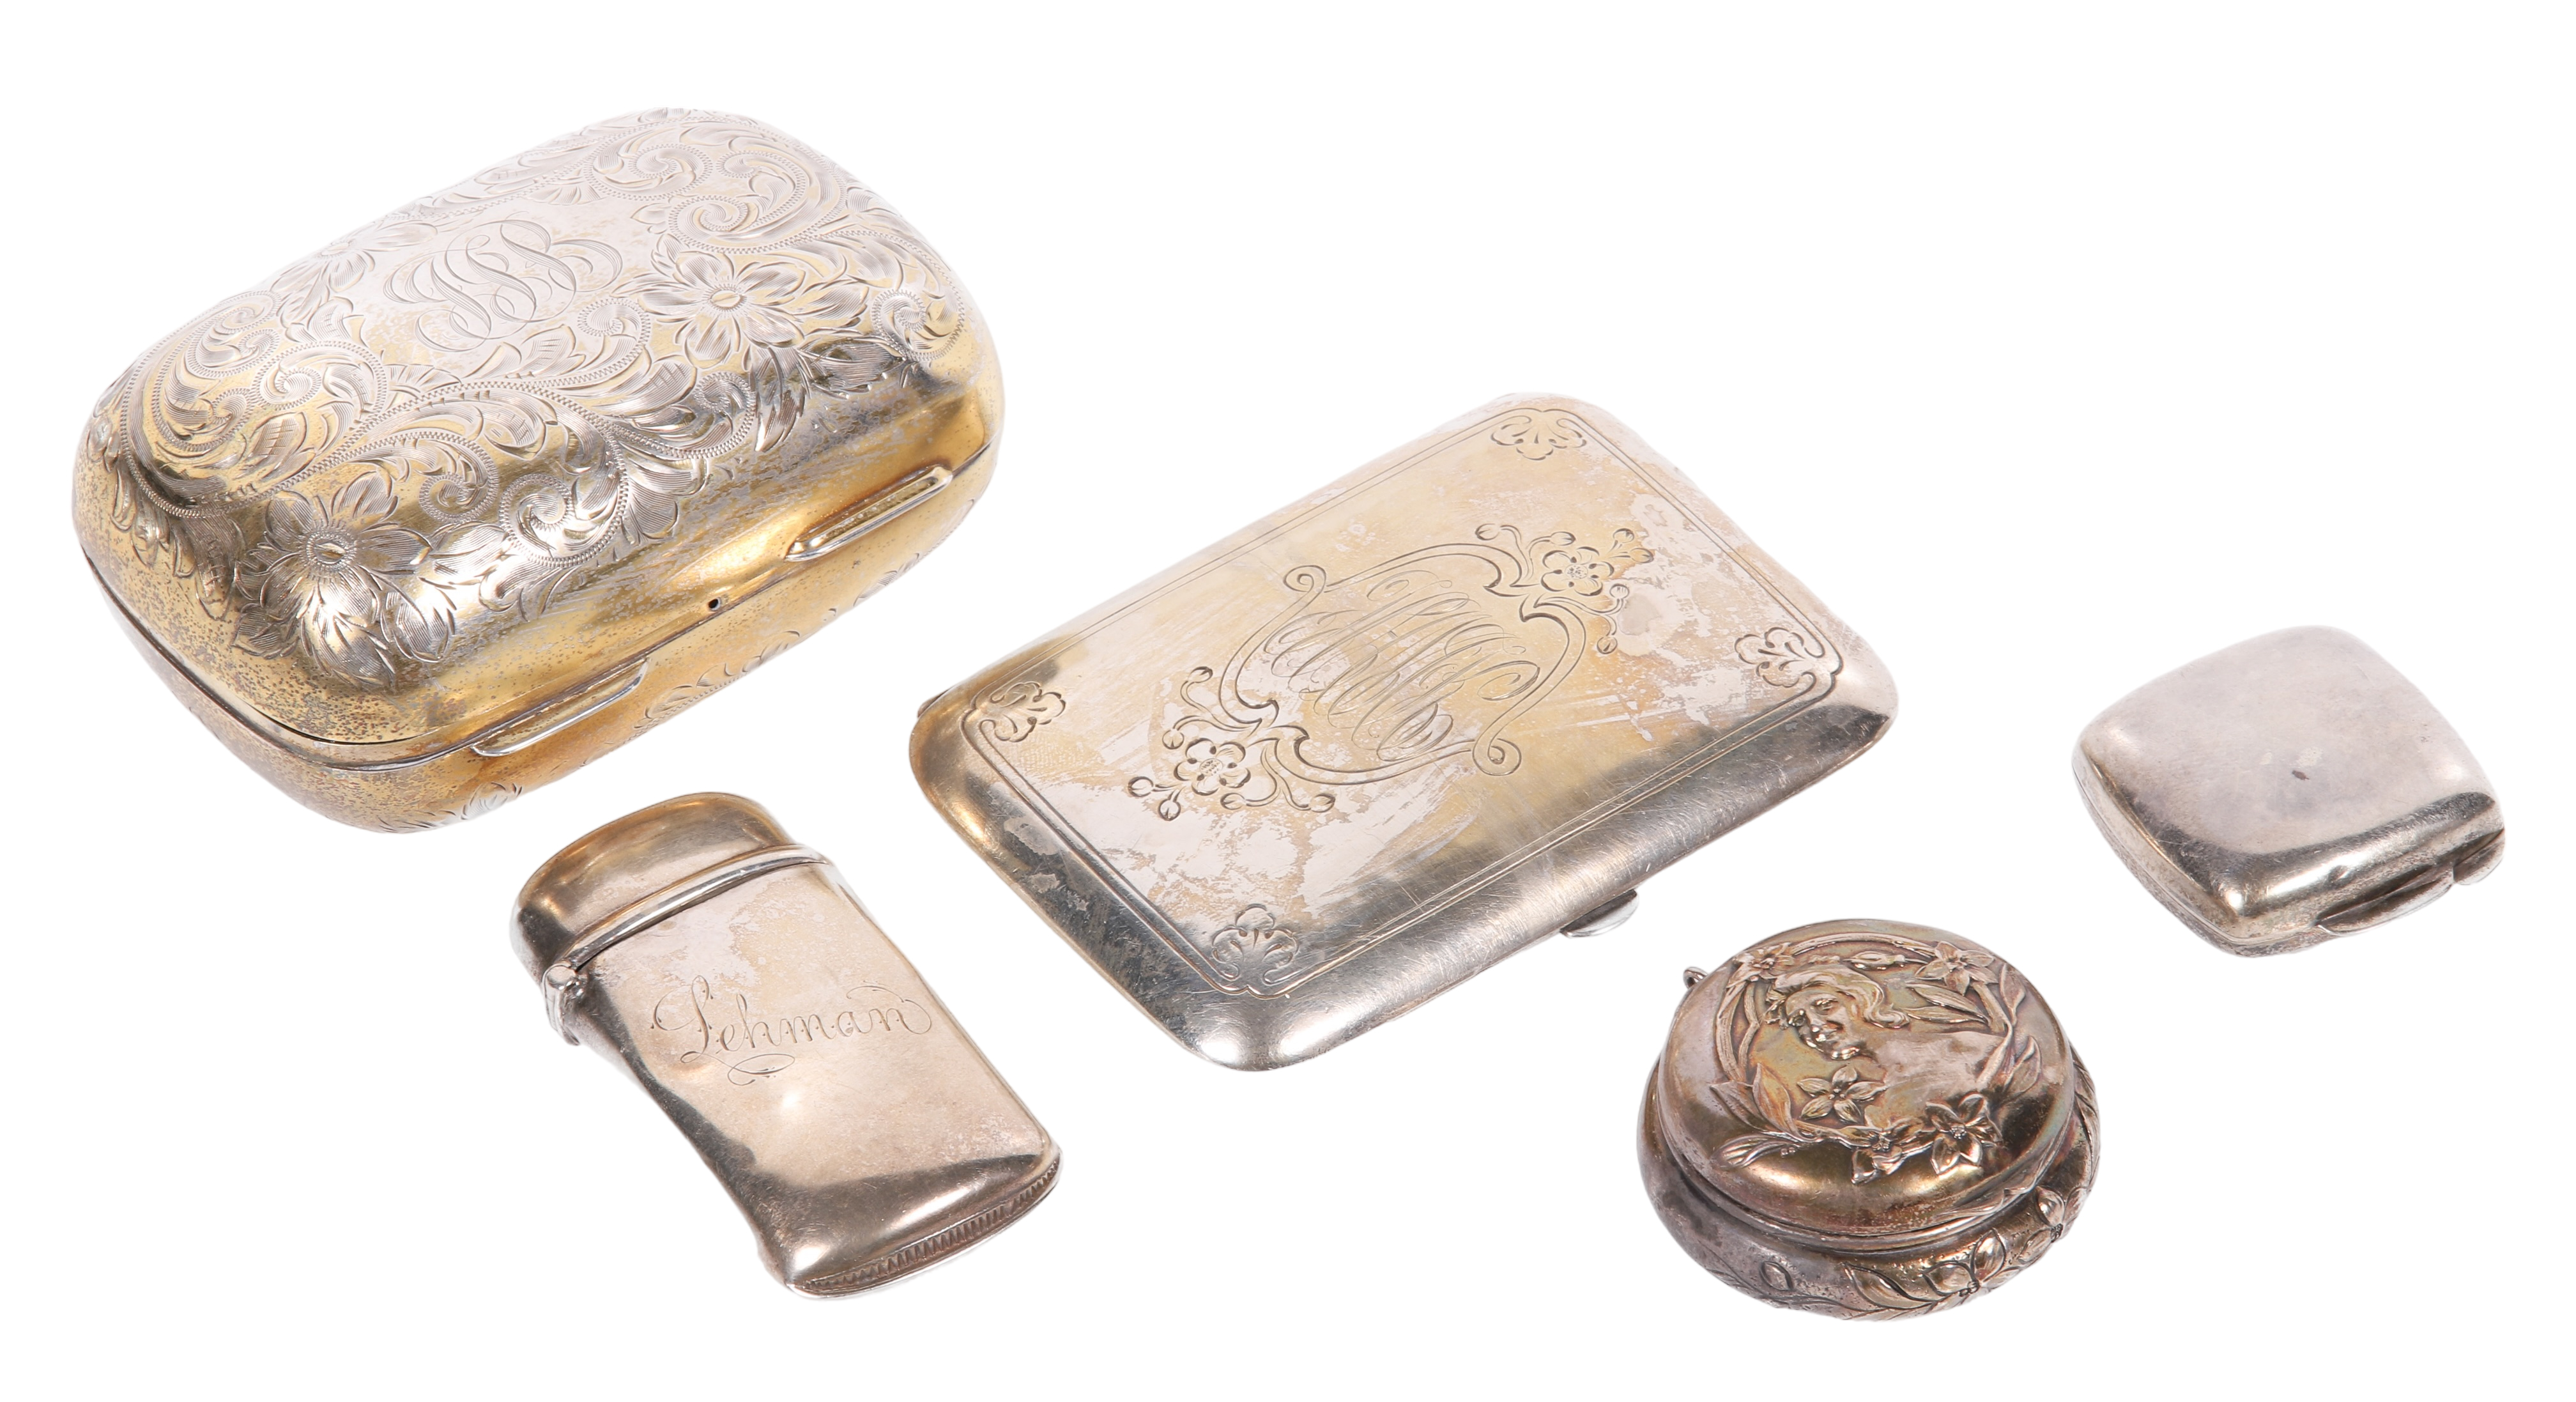  5 Sterling cases and pill boxes 2e155d